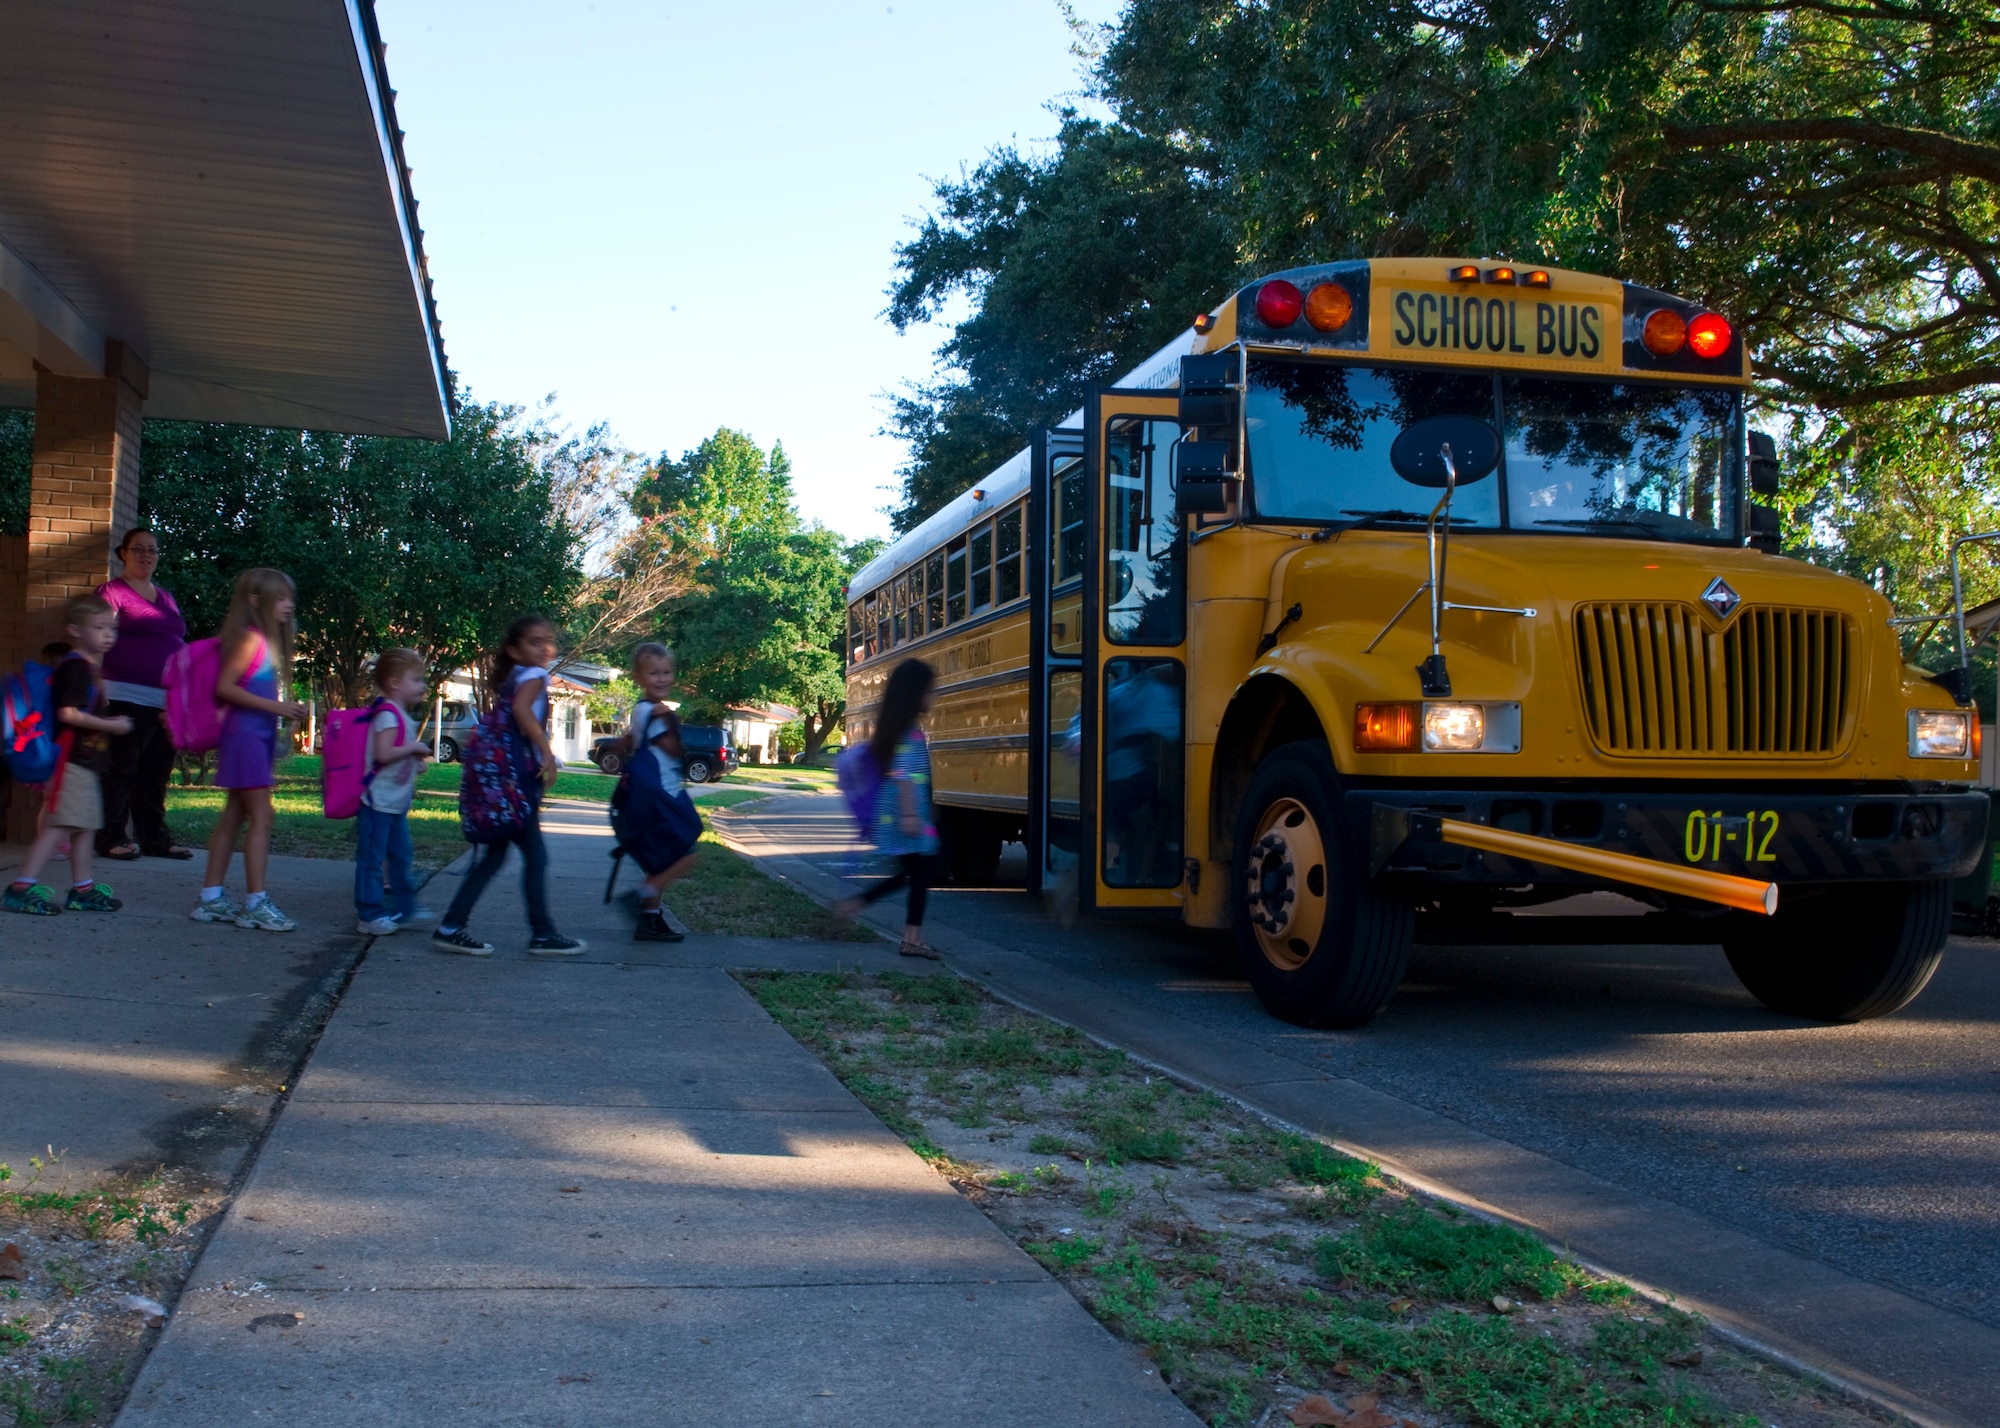 Children board a school bus in Hurlburt Field housing, Oct. 1, 2013. There are several bus stops throughout base transporting more than 500 children who reside in housing, to and from school. (U.S. Air Force Photo/Staff Sgt. John Bainter)